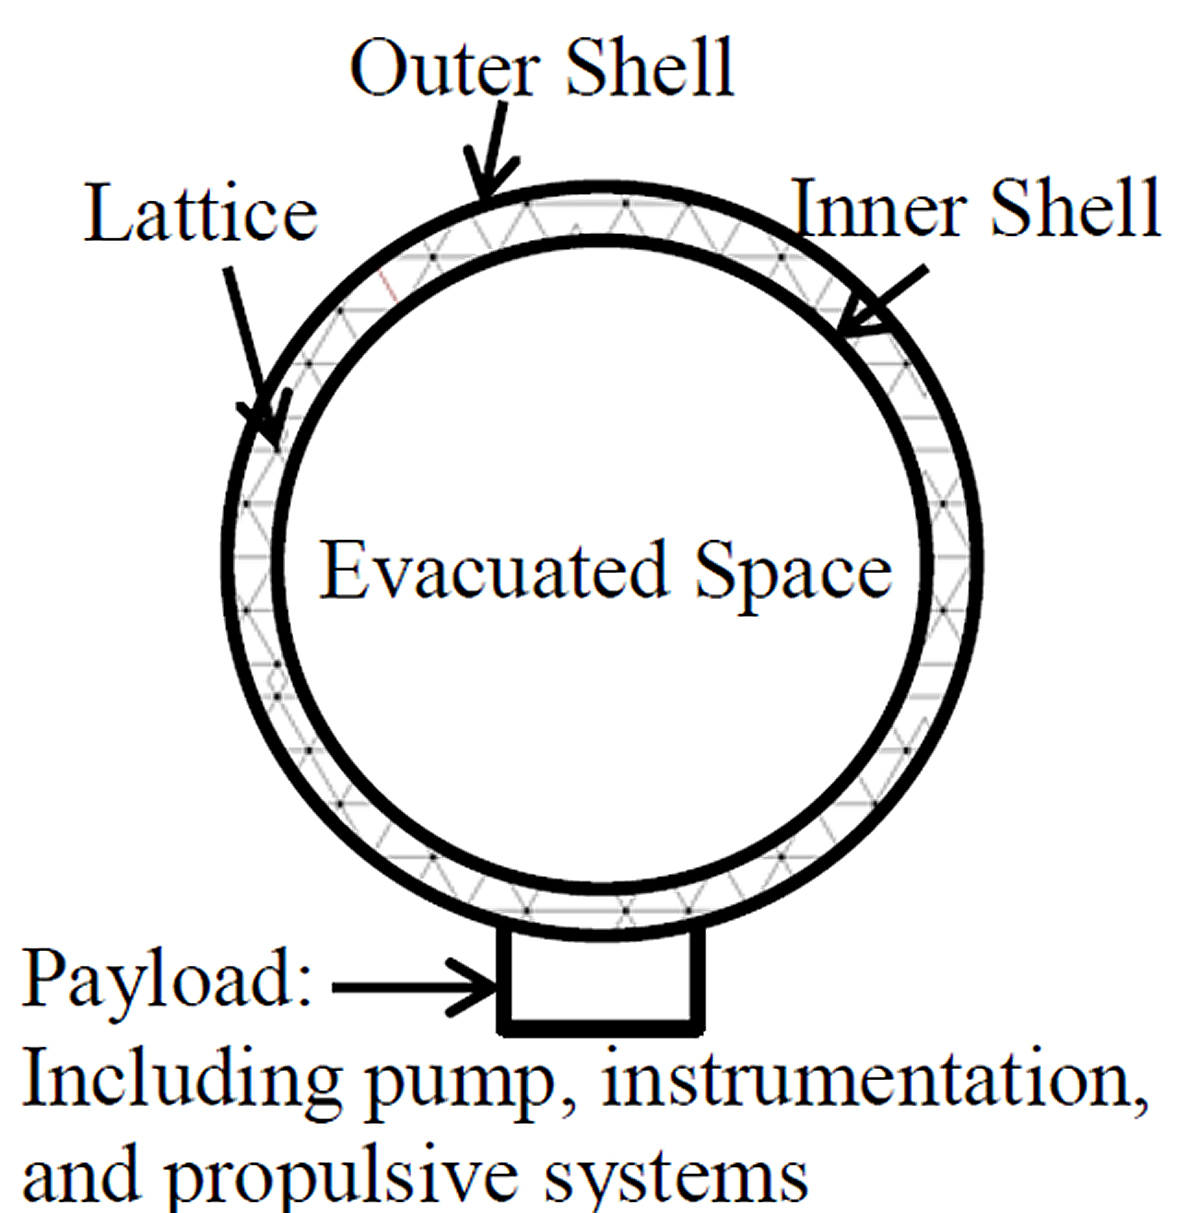 Evacuated Airship Diagram labeled with the Lattice, Outer Shell, Innter Shell, Evacuated Space and Payload.